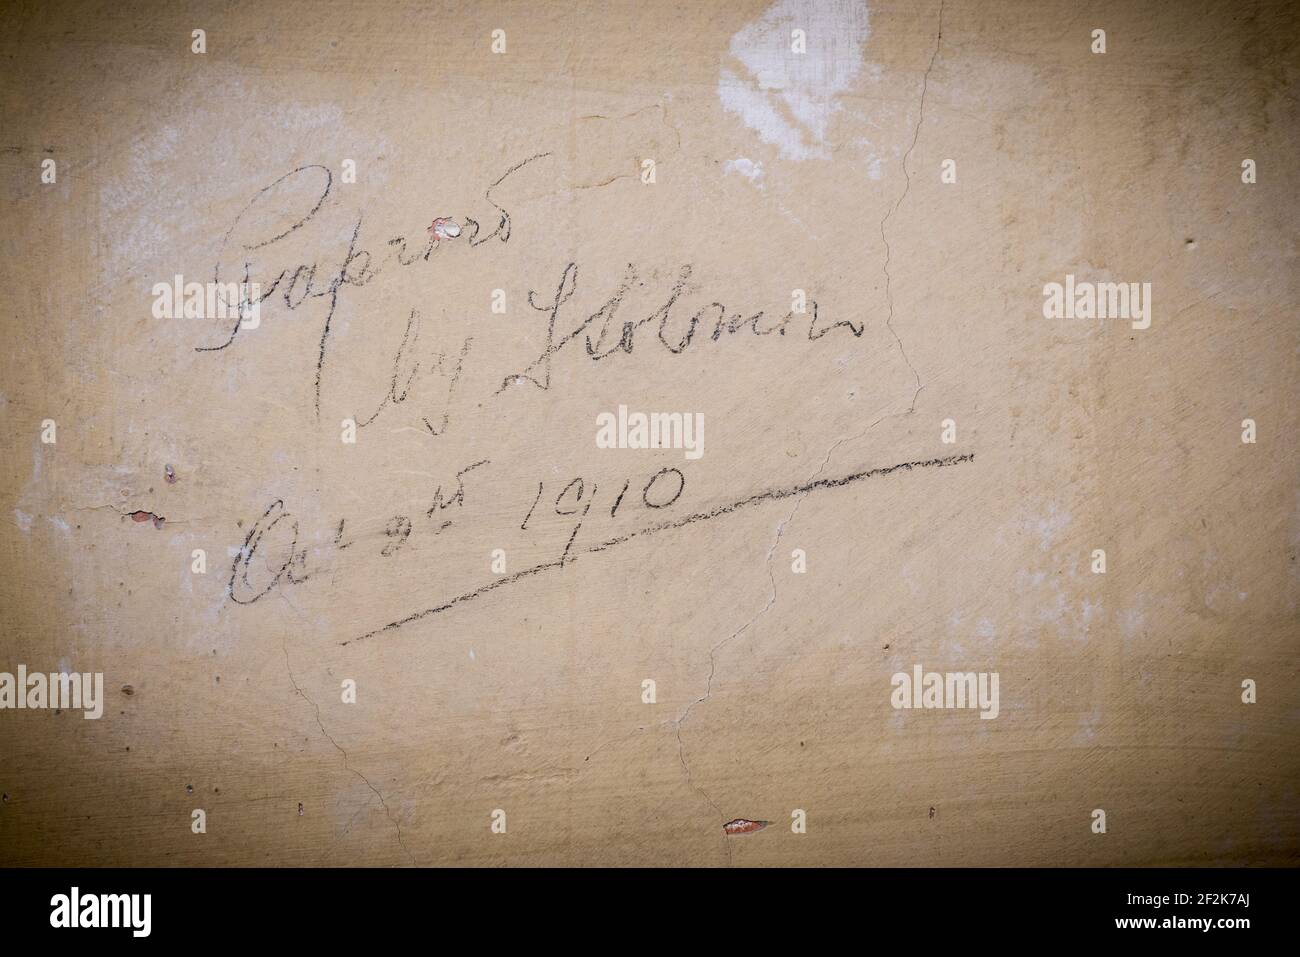 A signature on a wall in the Old Library, Bodmin, Cornwall, UK, 'Papered by F Solomon, Oct 9th 1910'. Stock Photo